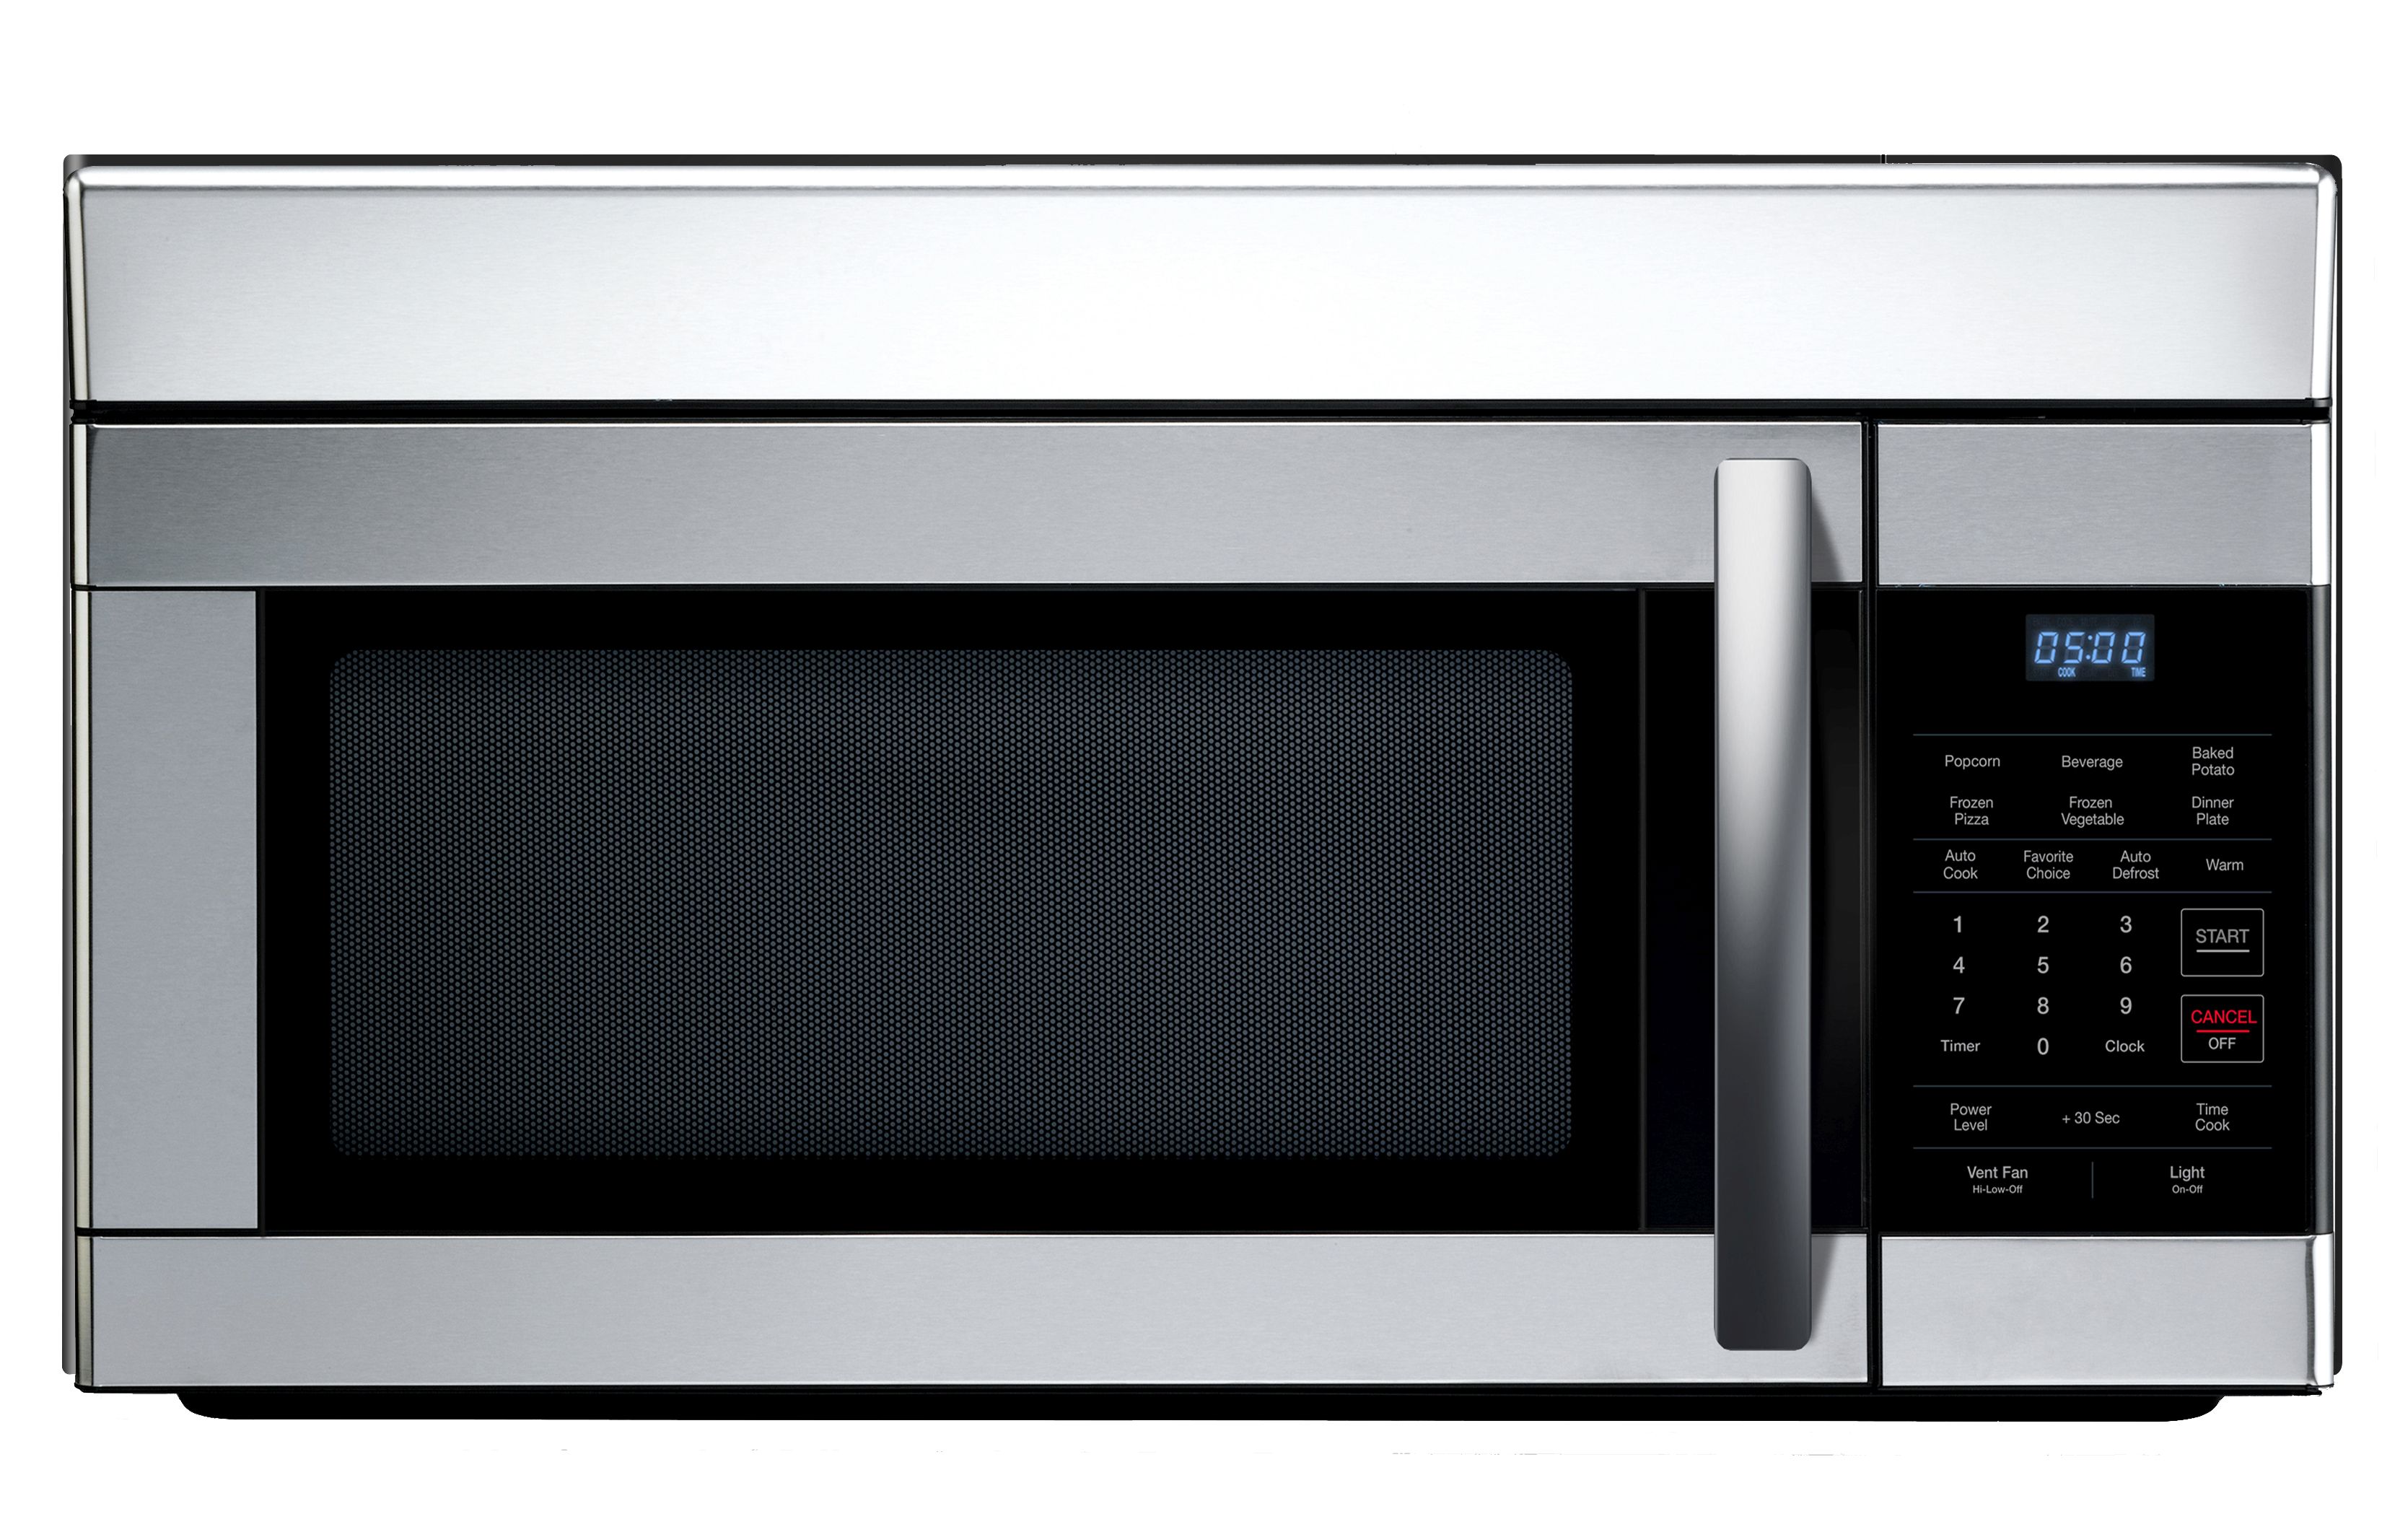 83513 1.6 cu. ft. Over-The-Range Microwave - Stainless Steel